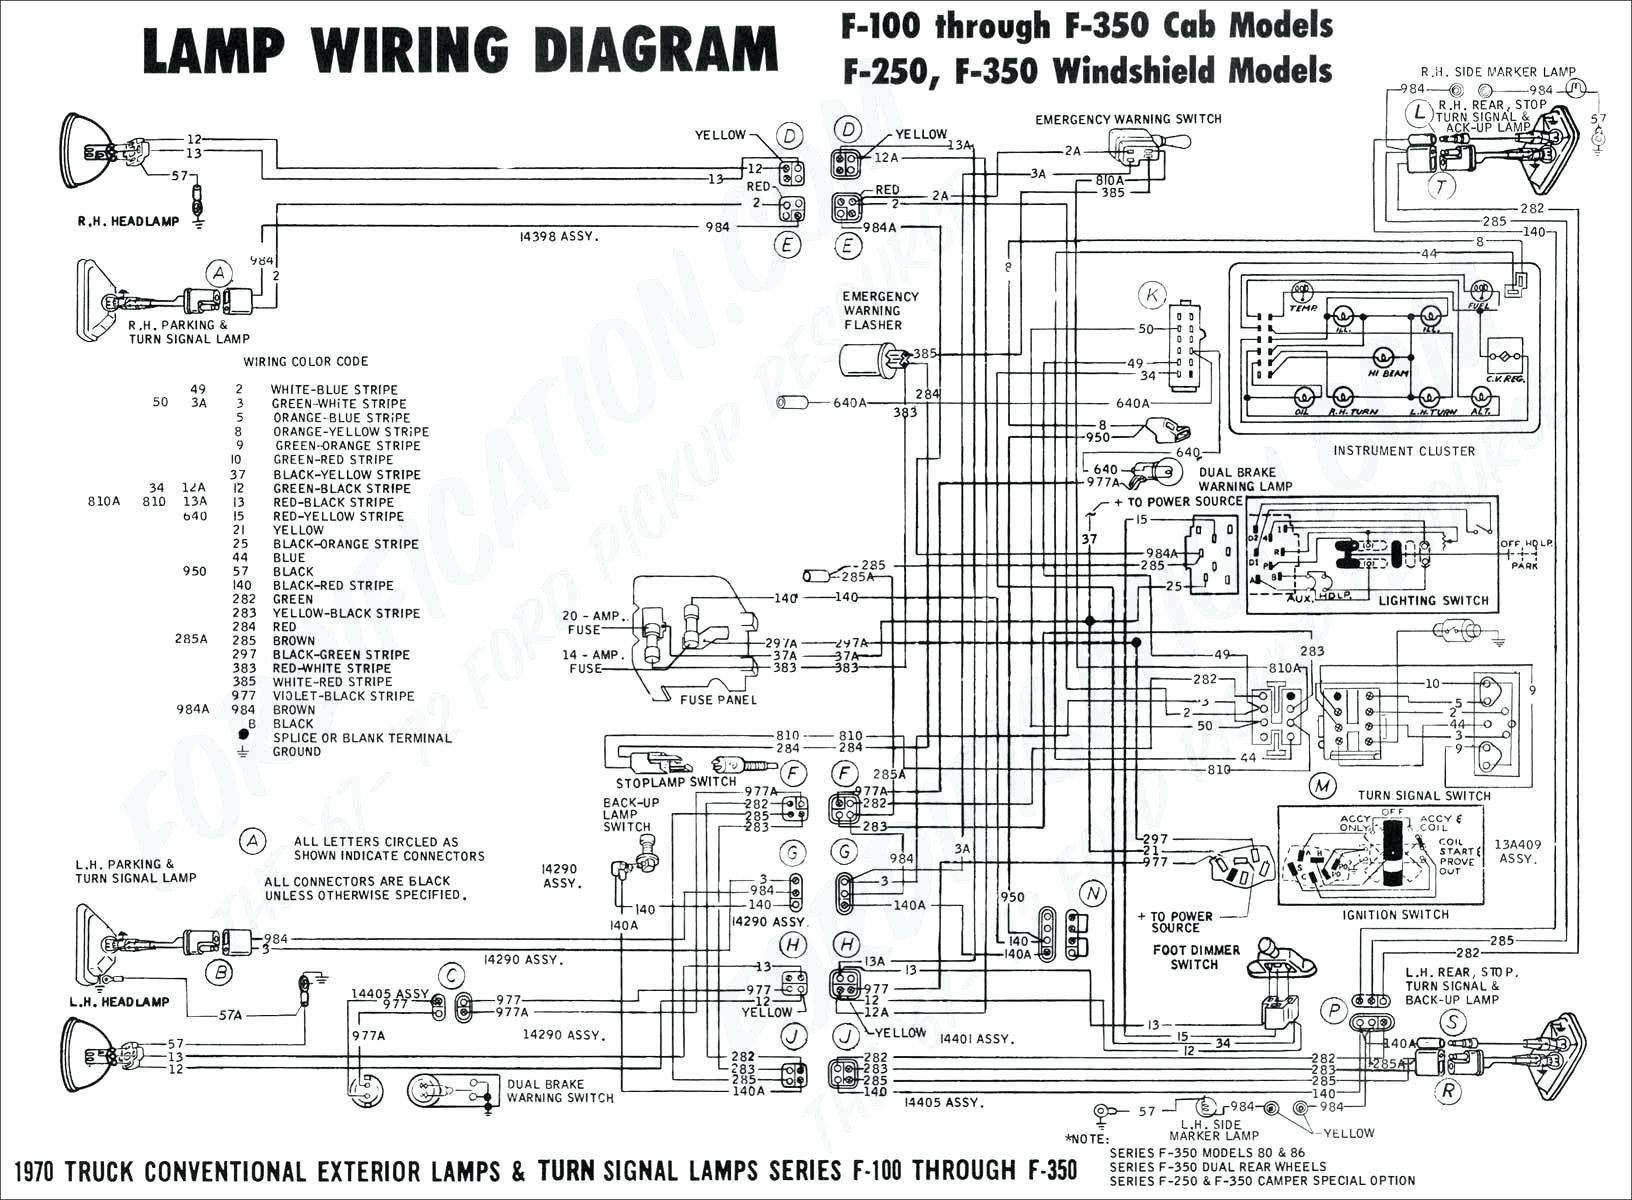 Ford 7 3 Diesel Engine Diagram ford F350 Wiring Harness Simple Guide About Wiring Diagram